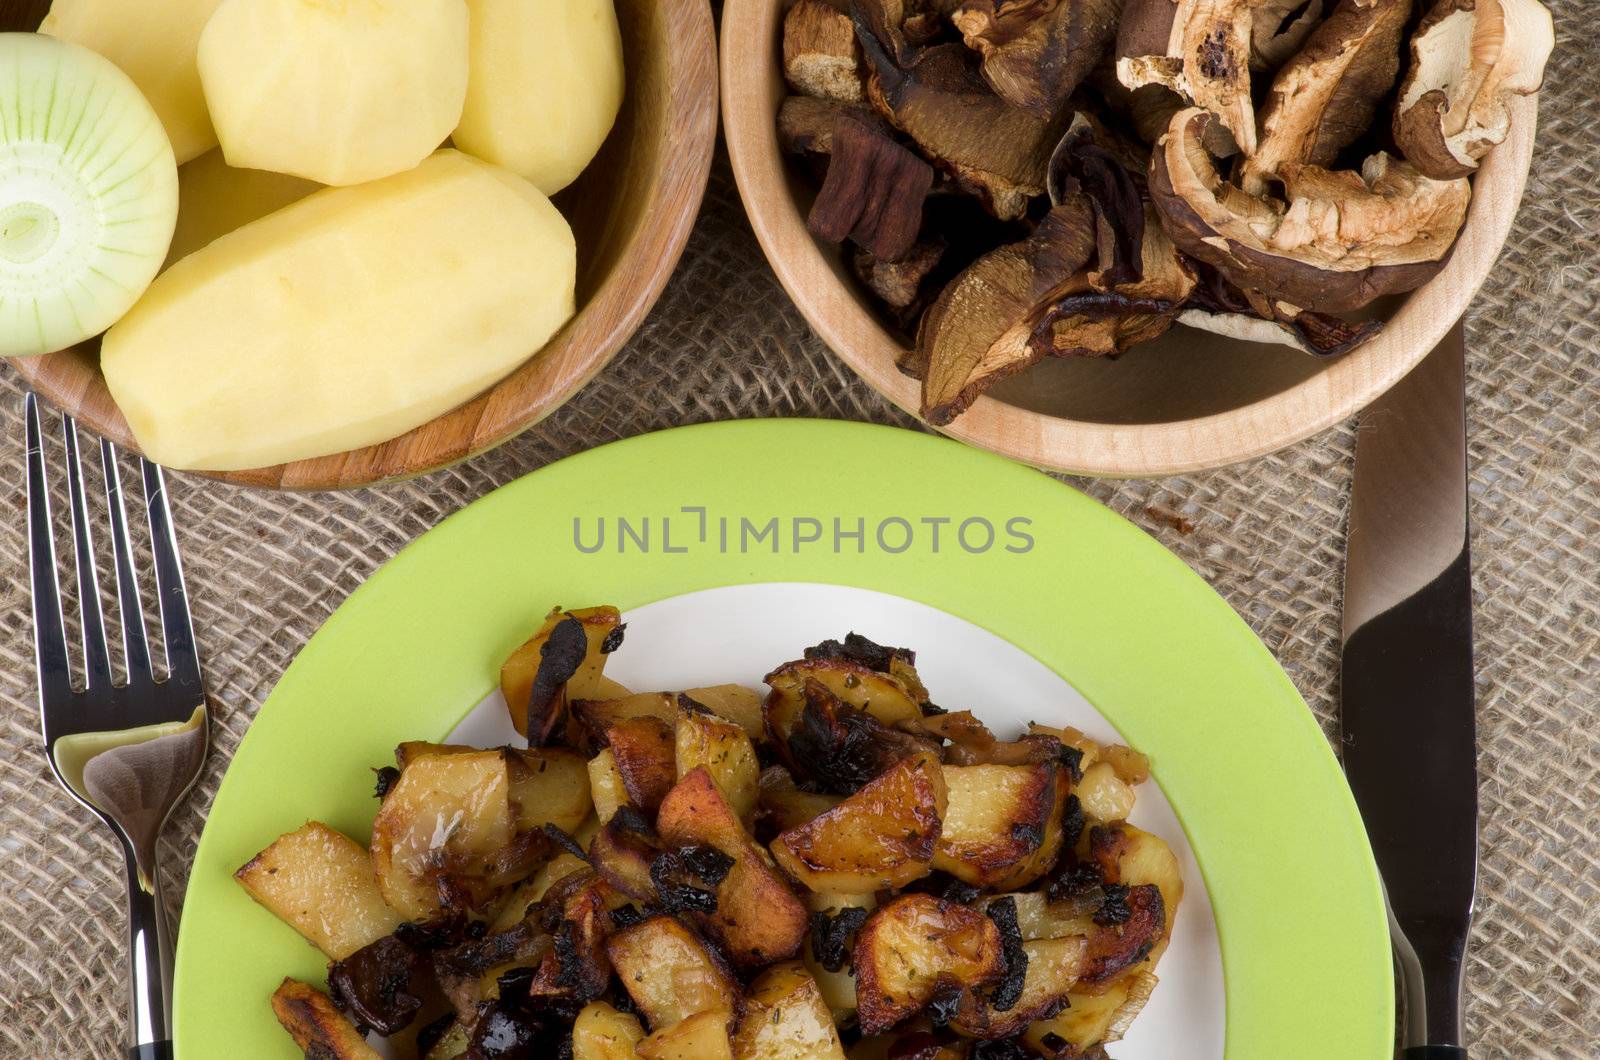 Traditional Roasted Potato with Mushrooms, Onion and Spices. Arrangement of Green Plate with Prepared Potato, Two Wood Bowls with RawPotato, Onion and Slices of Mushrooms and Fork with Knife close up